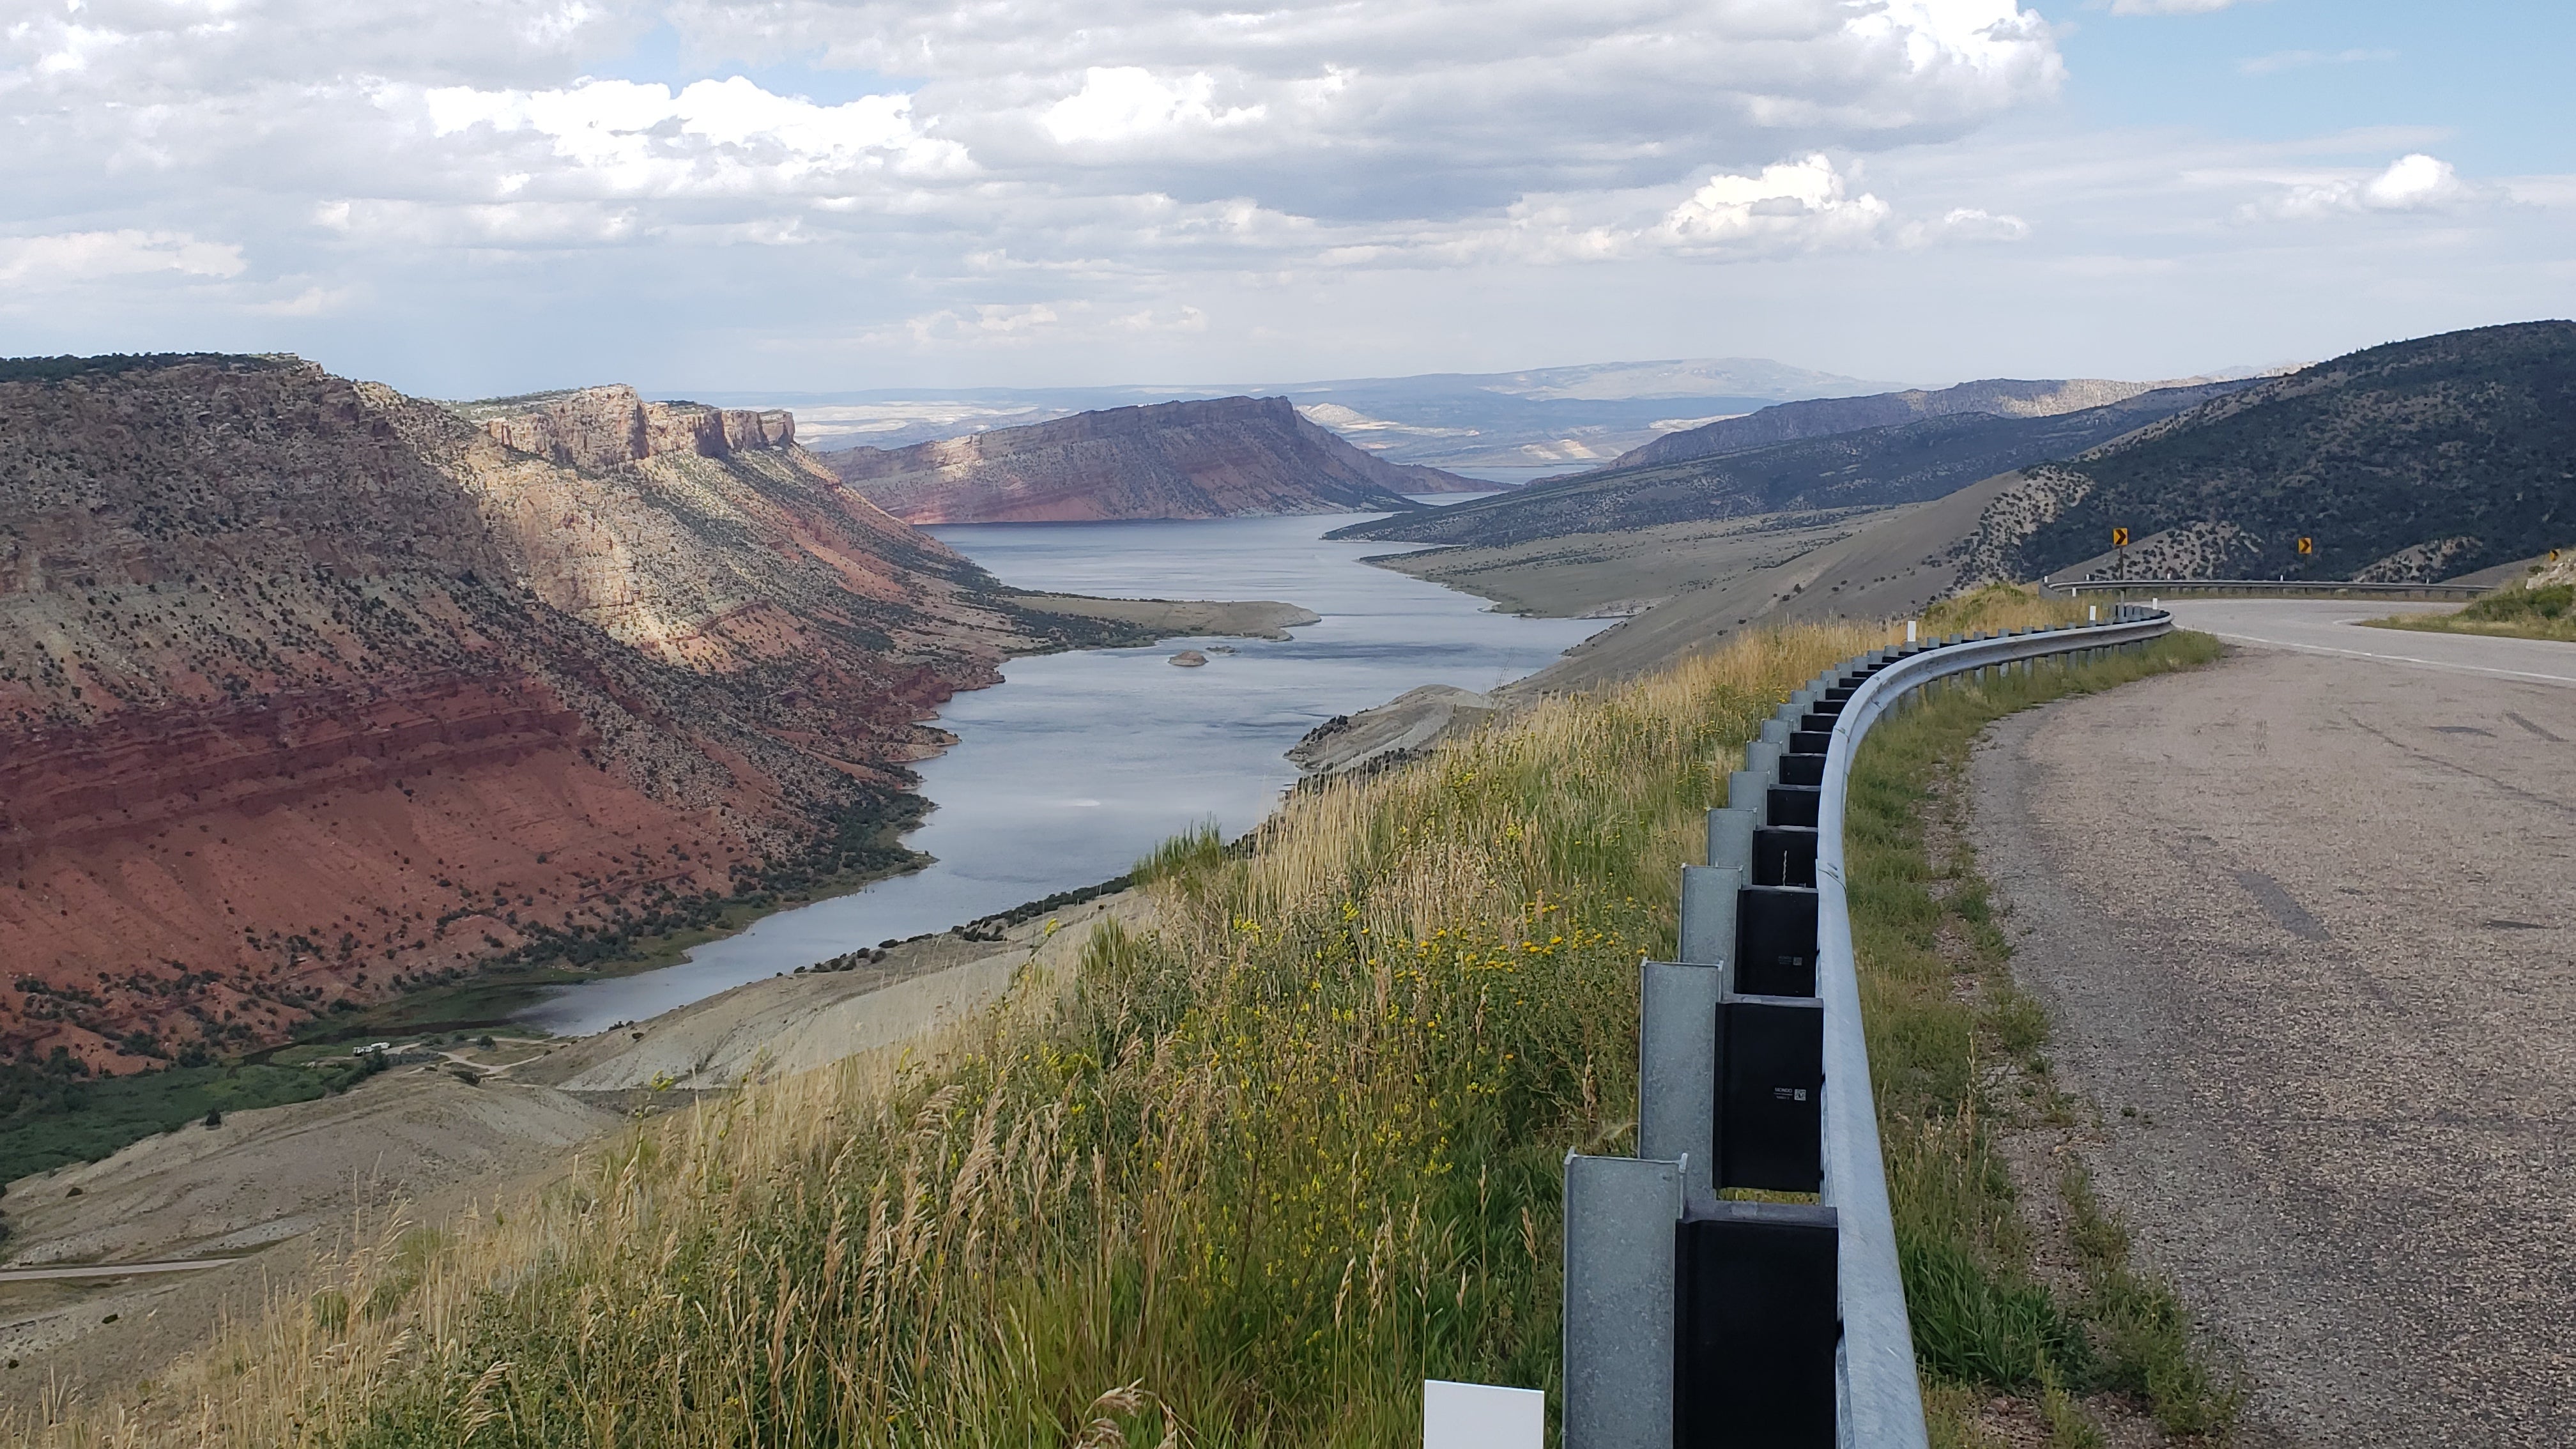 A view from above the Flaming Gorge, Wyoming